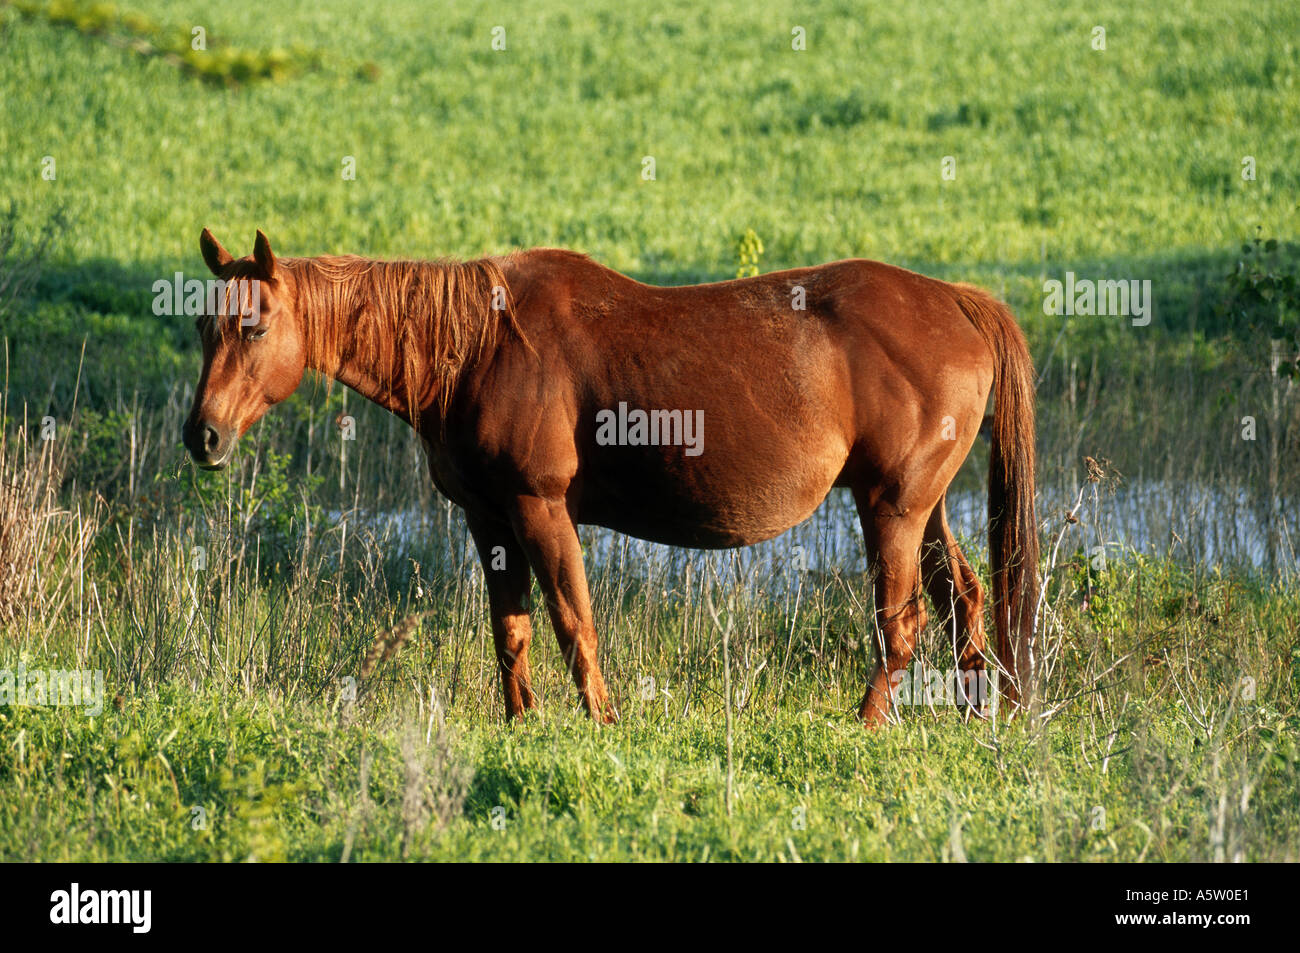 - Quarter Horse standing on meadow Banque D'Images